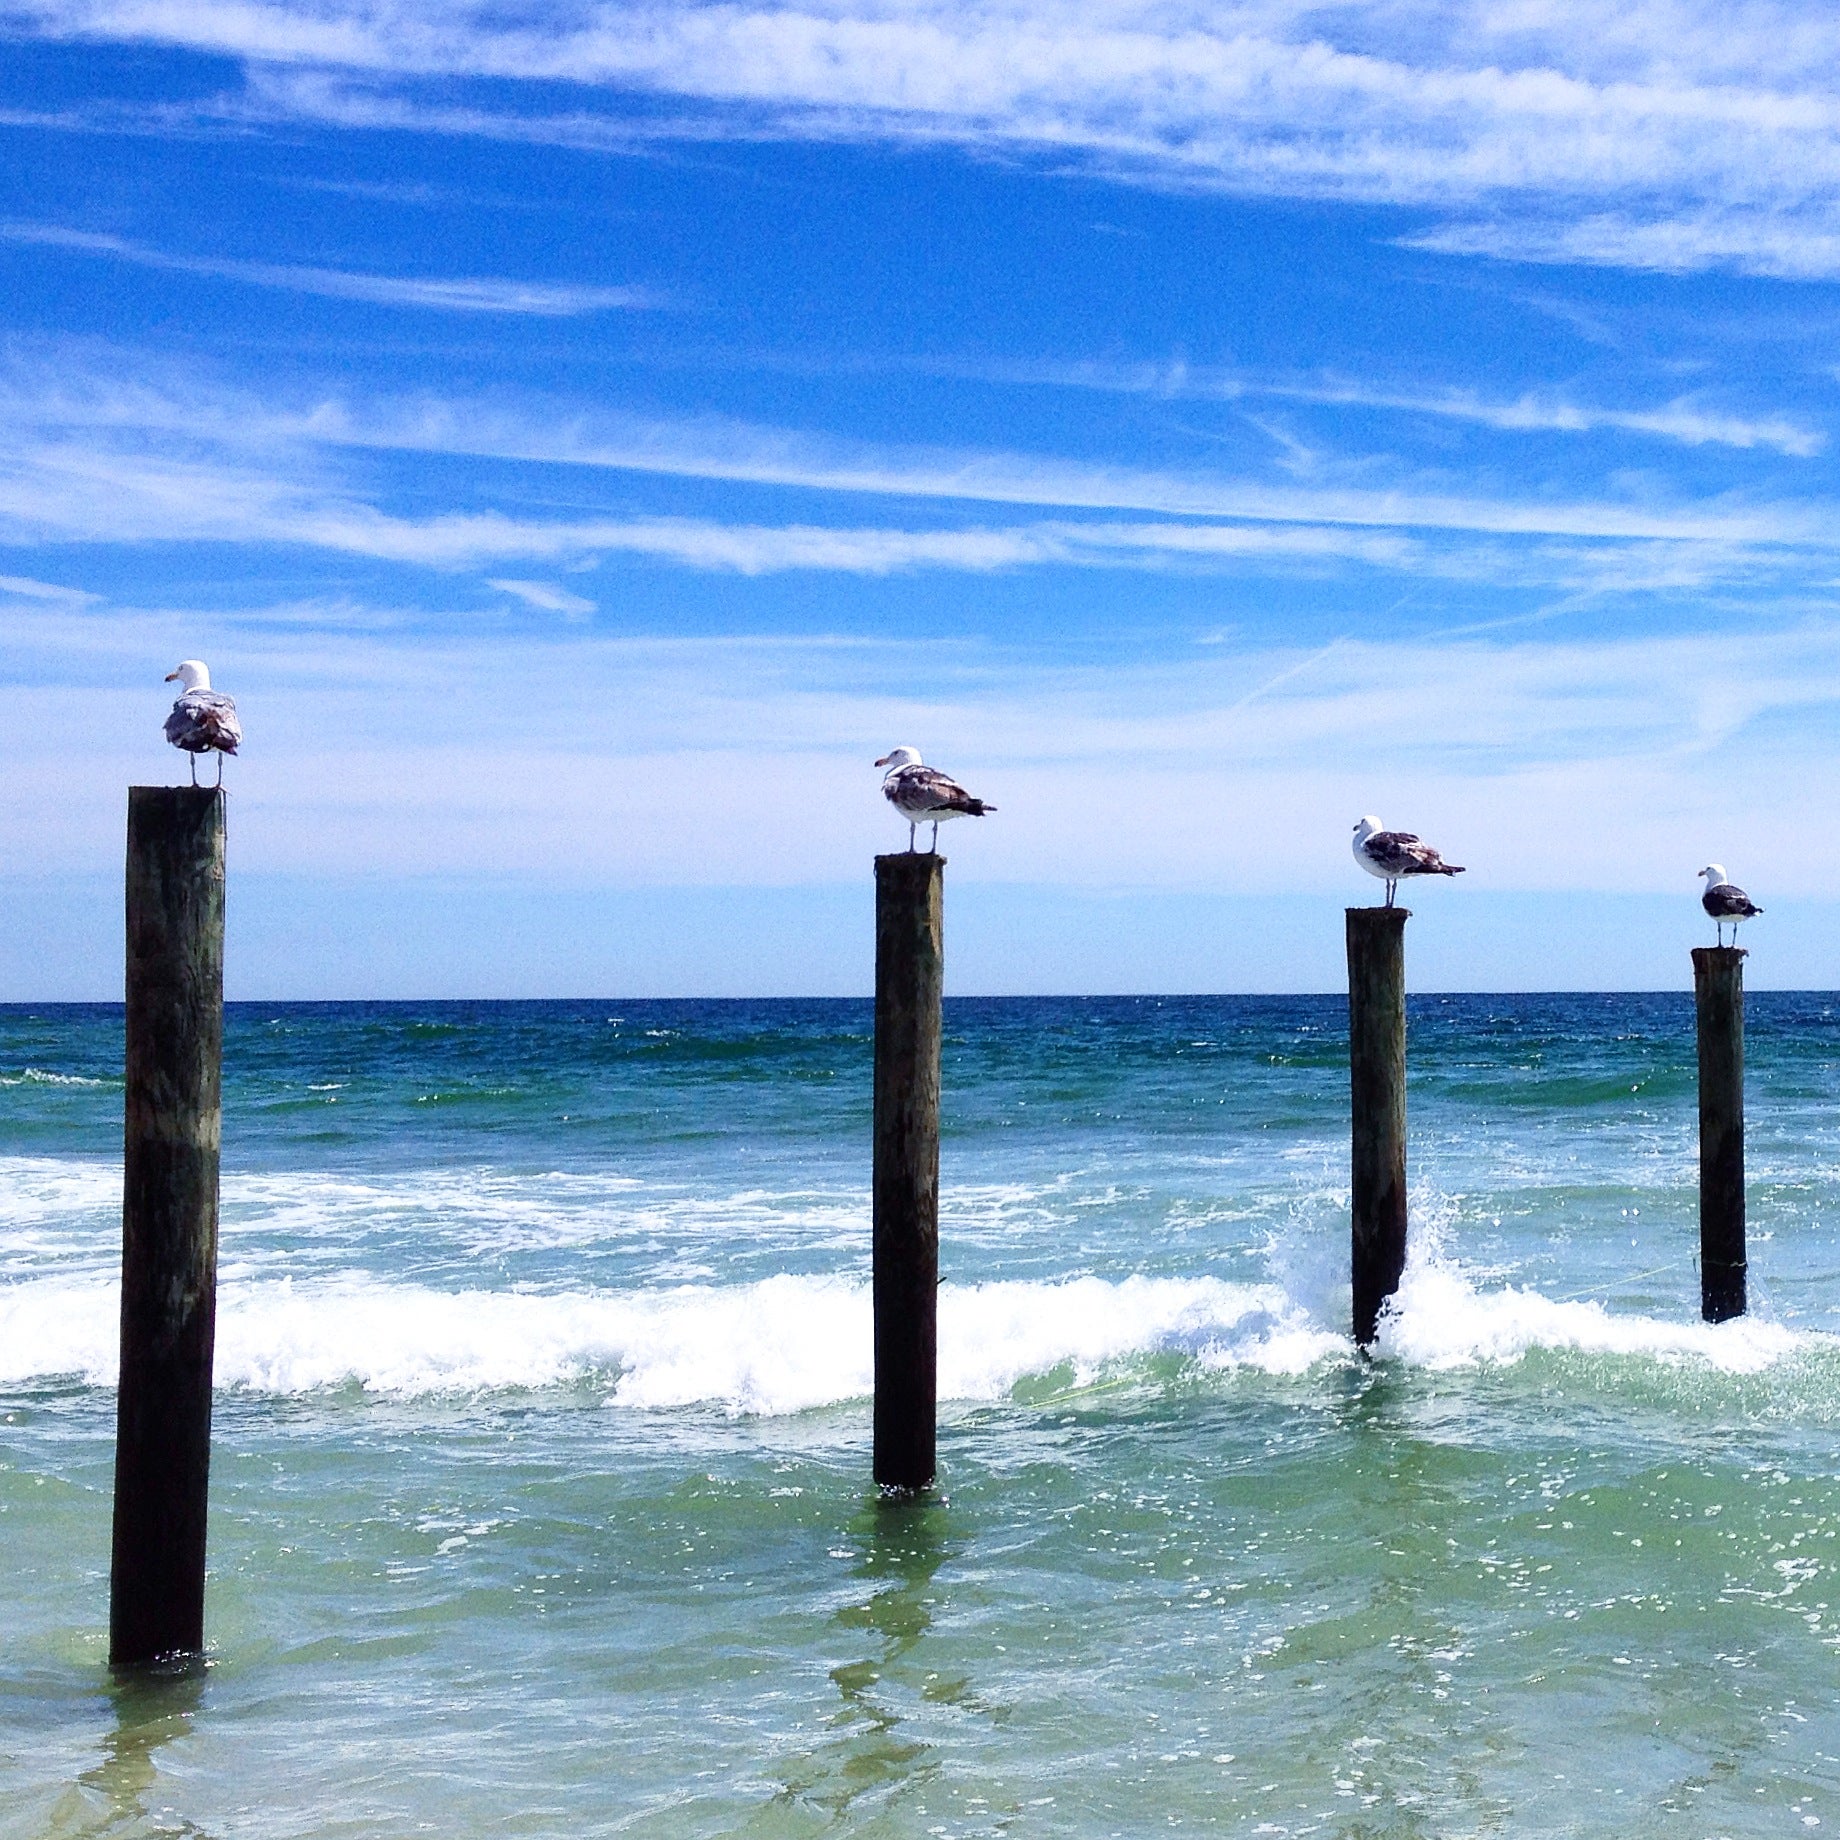  Seagulls resting on the pilings that once supported Funtown Pier in Seaside Park on June 20, 2014. The pier was deemed unsafe after Superstorm Sandy then destroyed by the boardwalk fire in September 2013. (Justin Auciello/for NewsWorks) 